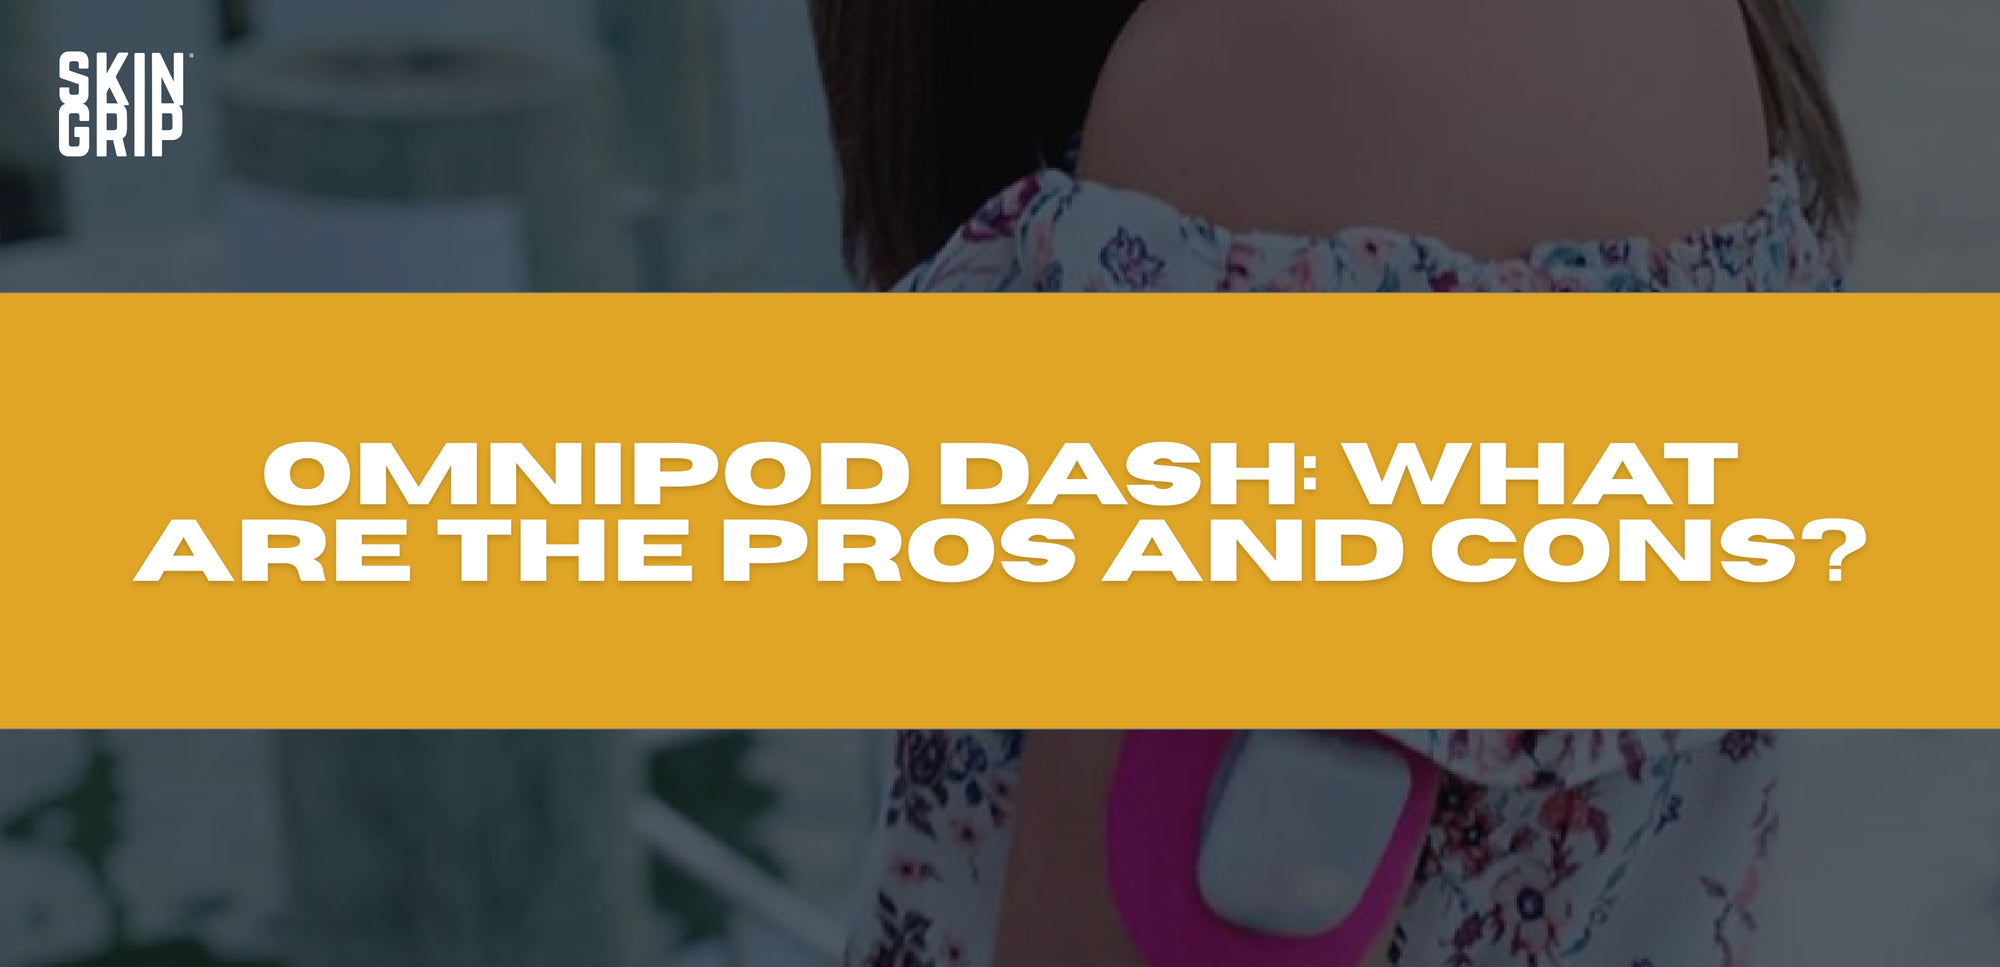 Omnipod DASH: What are the pros and cons?